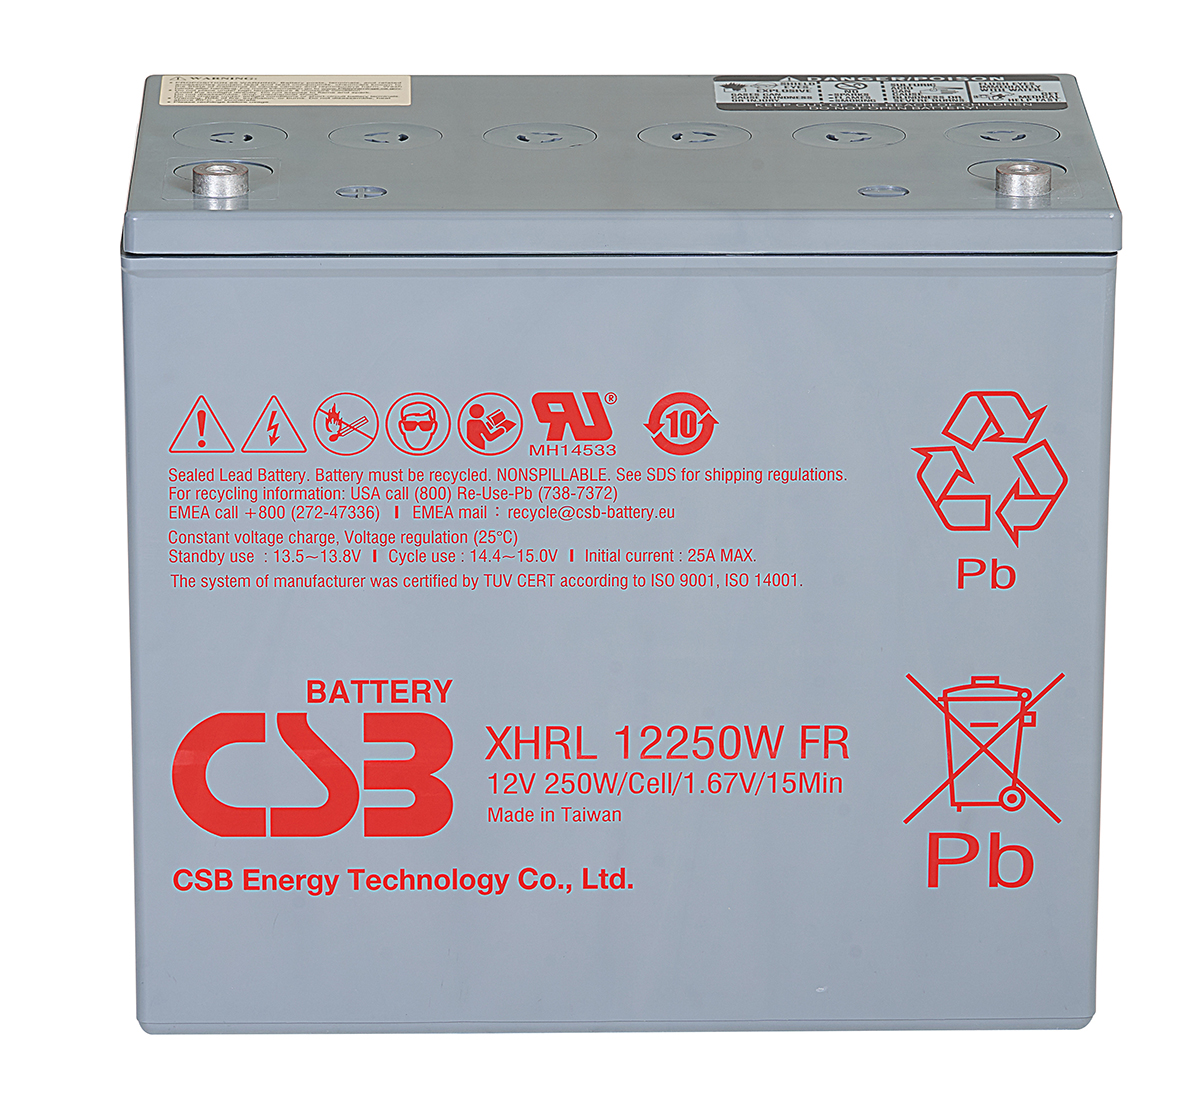 CSB XHRL12250W 250W Extreme High Rate Long Life Battery